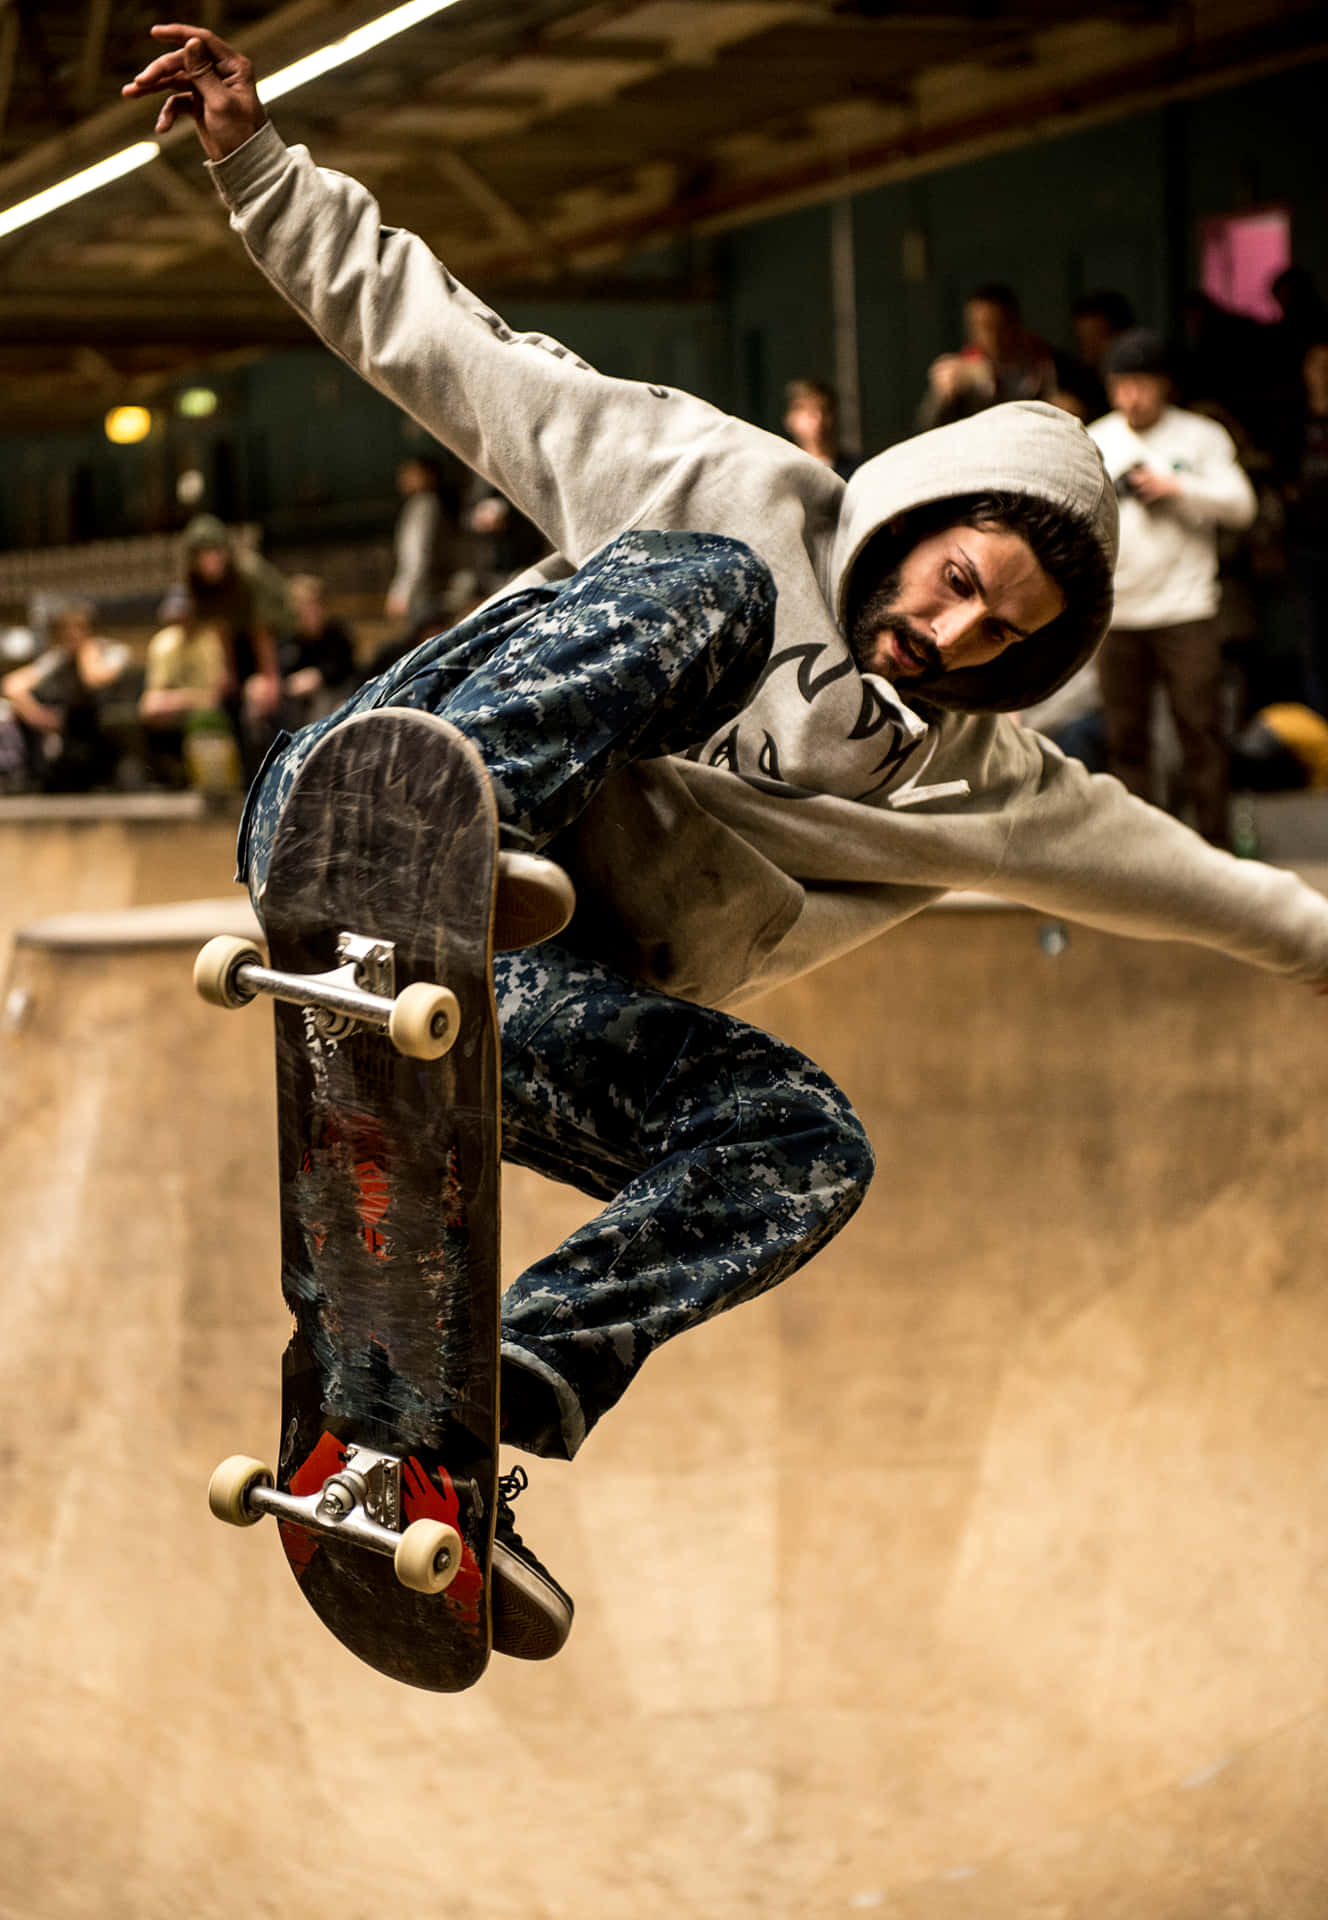 Skateboarding is a great way to exercise and have fun!